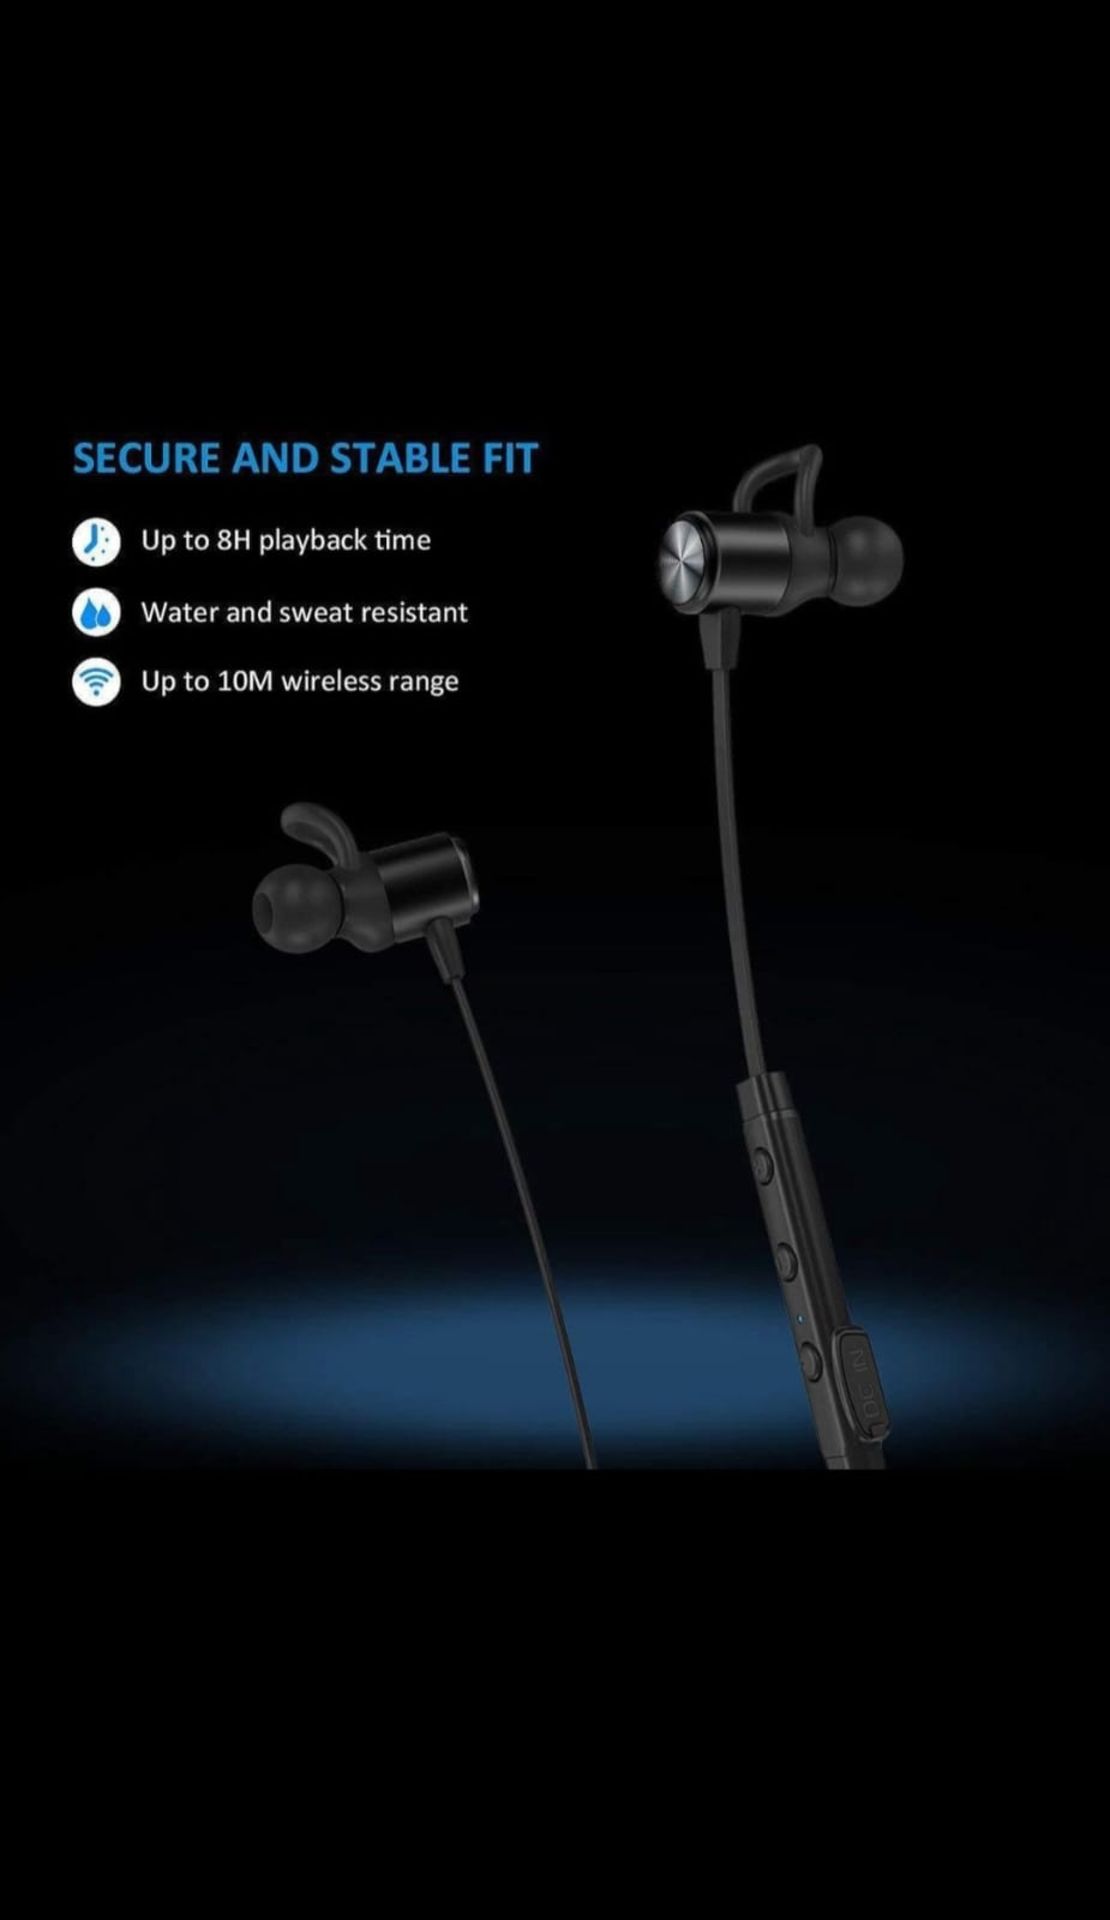 X 4 ATGOIN BLUETOOTH WIRELESS SPORT EARPHONE UP TO 8 HOURS PLAY TIME W/MIC HD STEREO SWEATPROOF & - Image 2 of 2